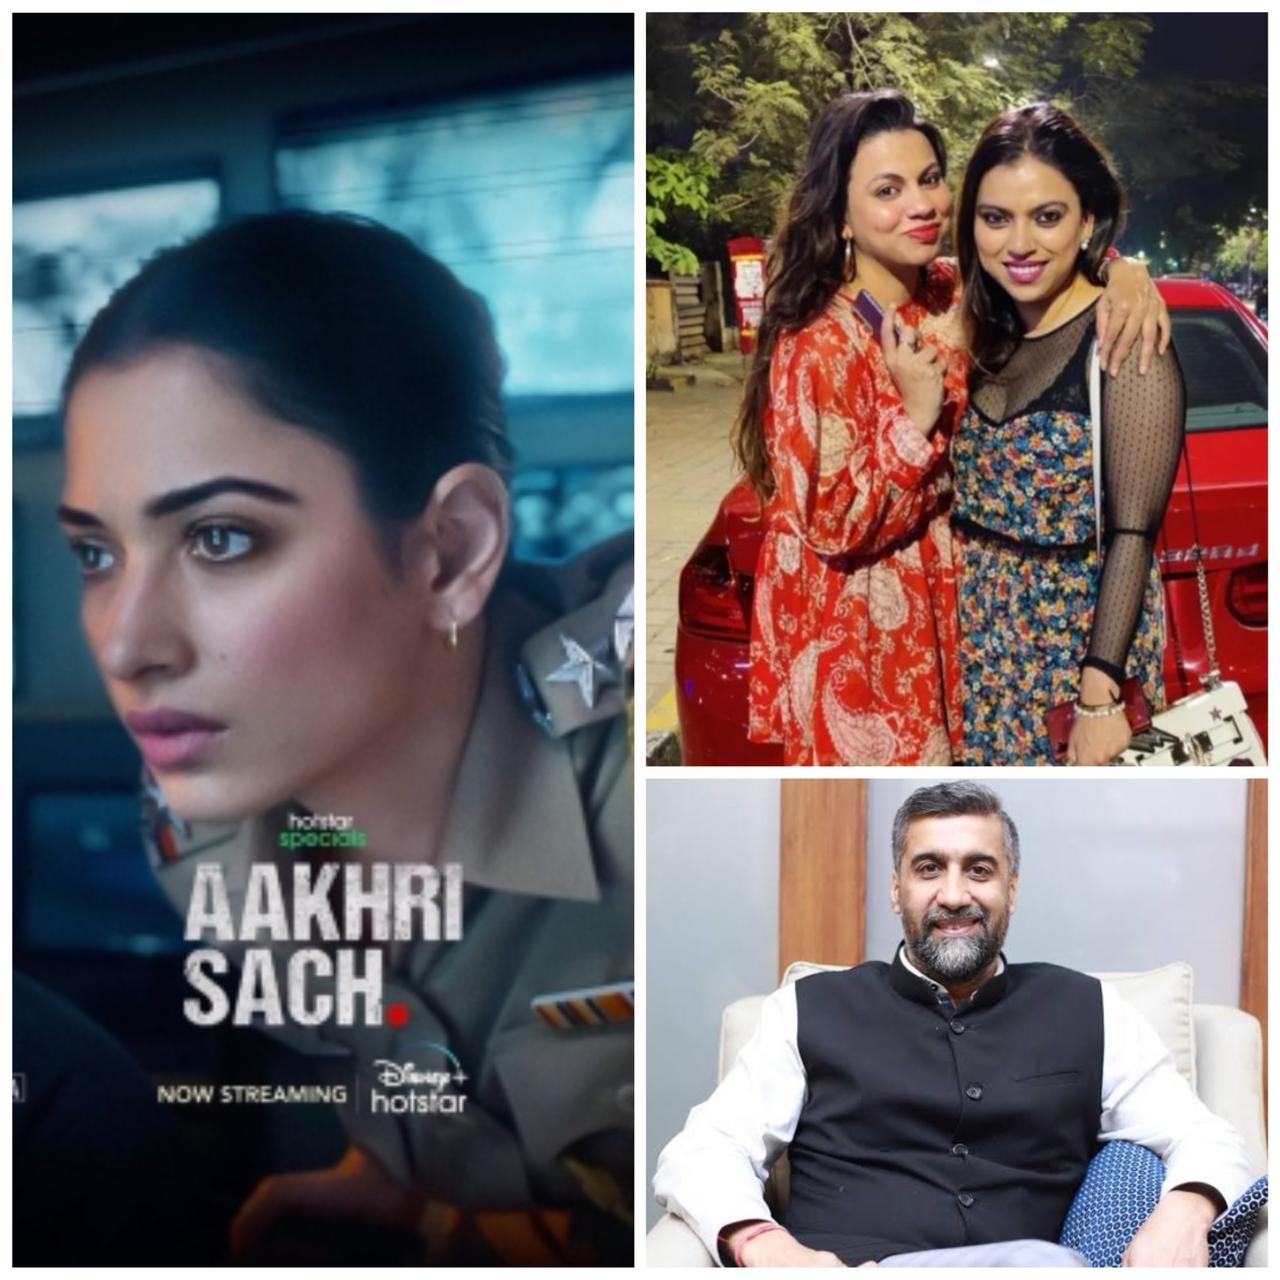 Unraveling the Drama Behind ‘Aakhri Sach’: Producers Battle for Dues and Deception”